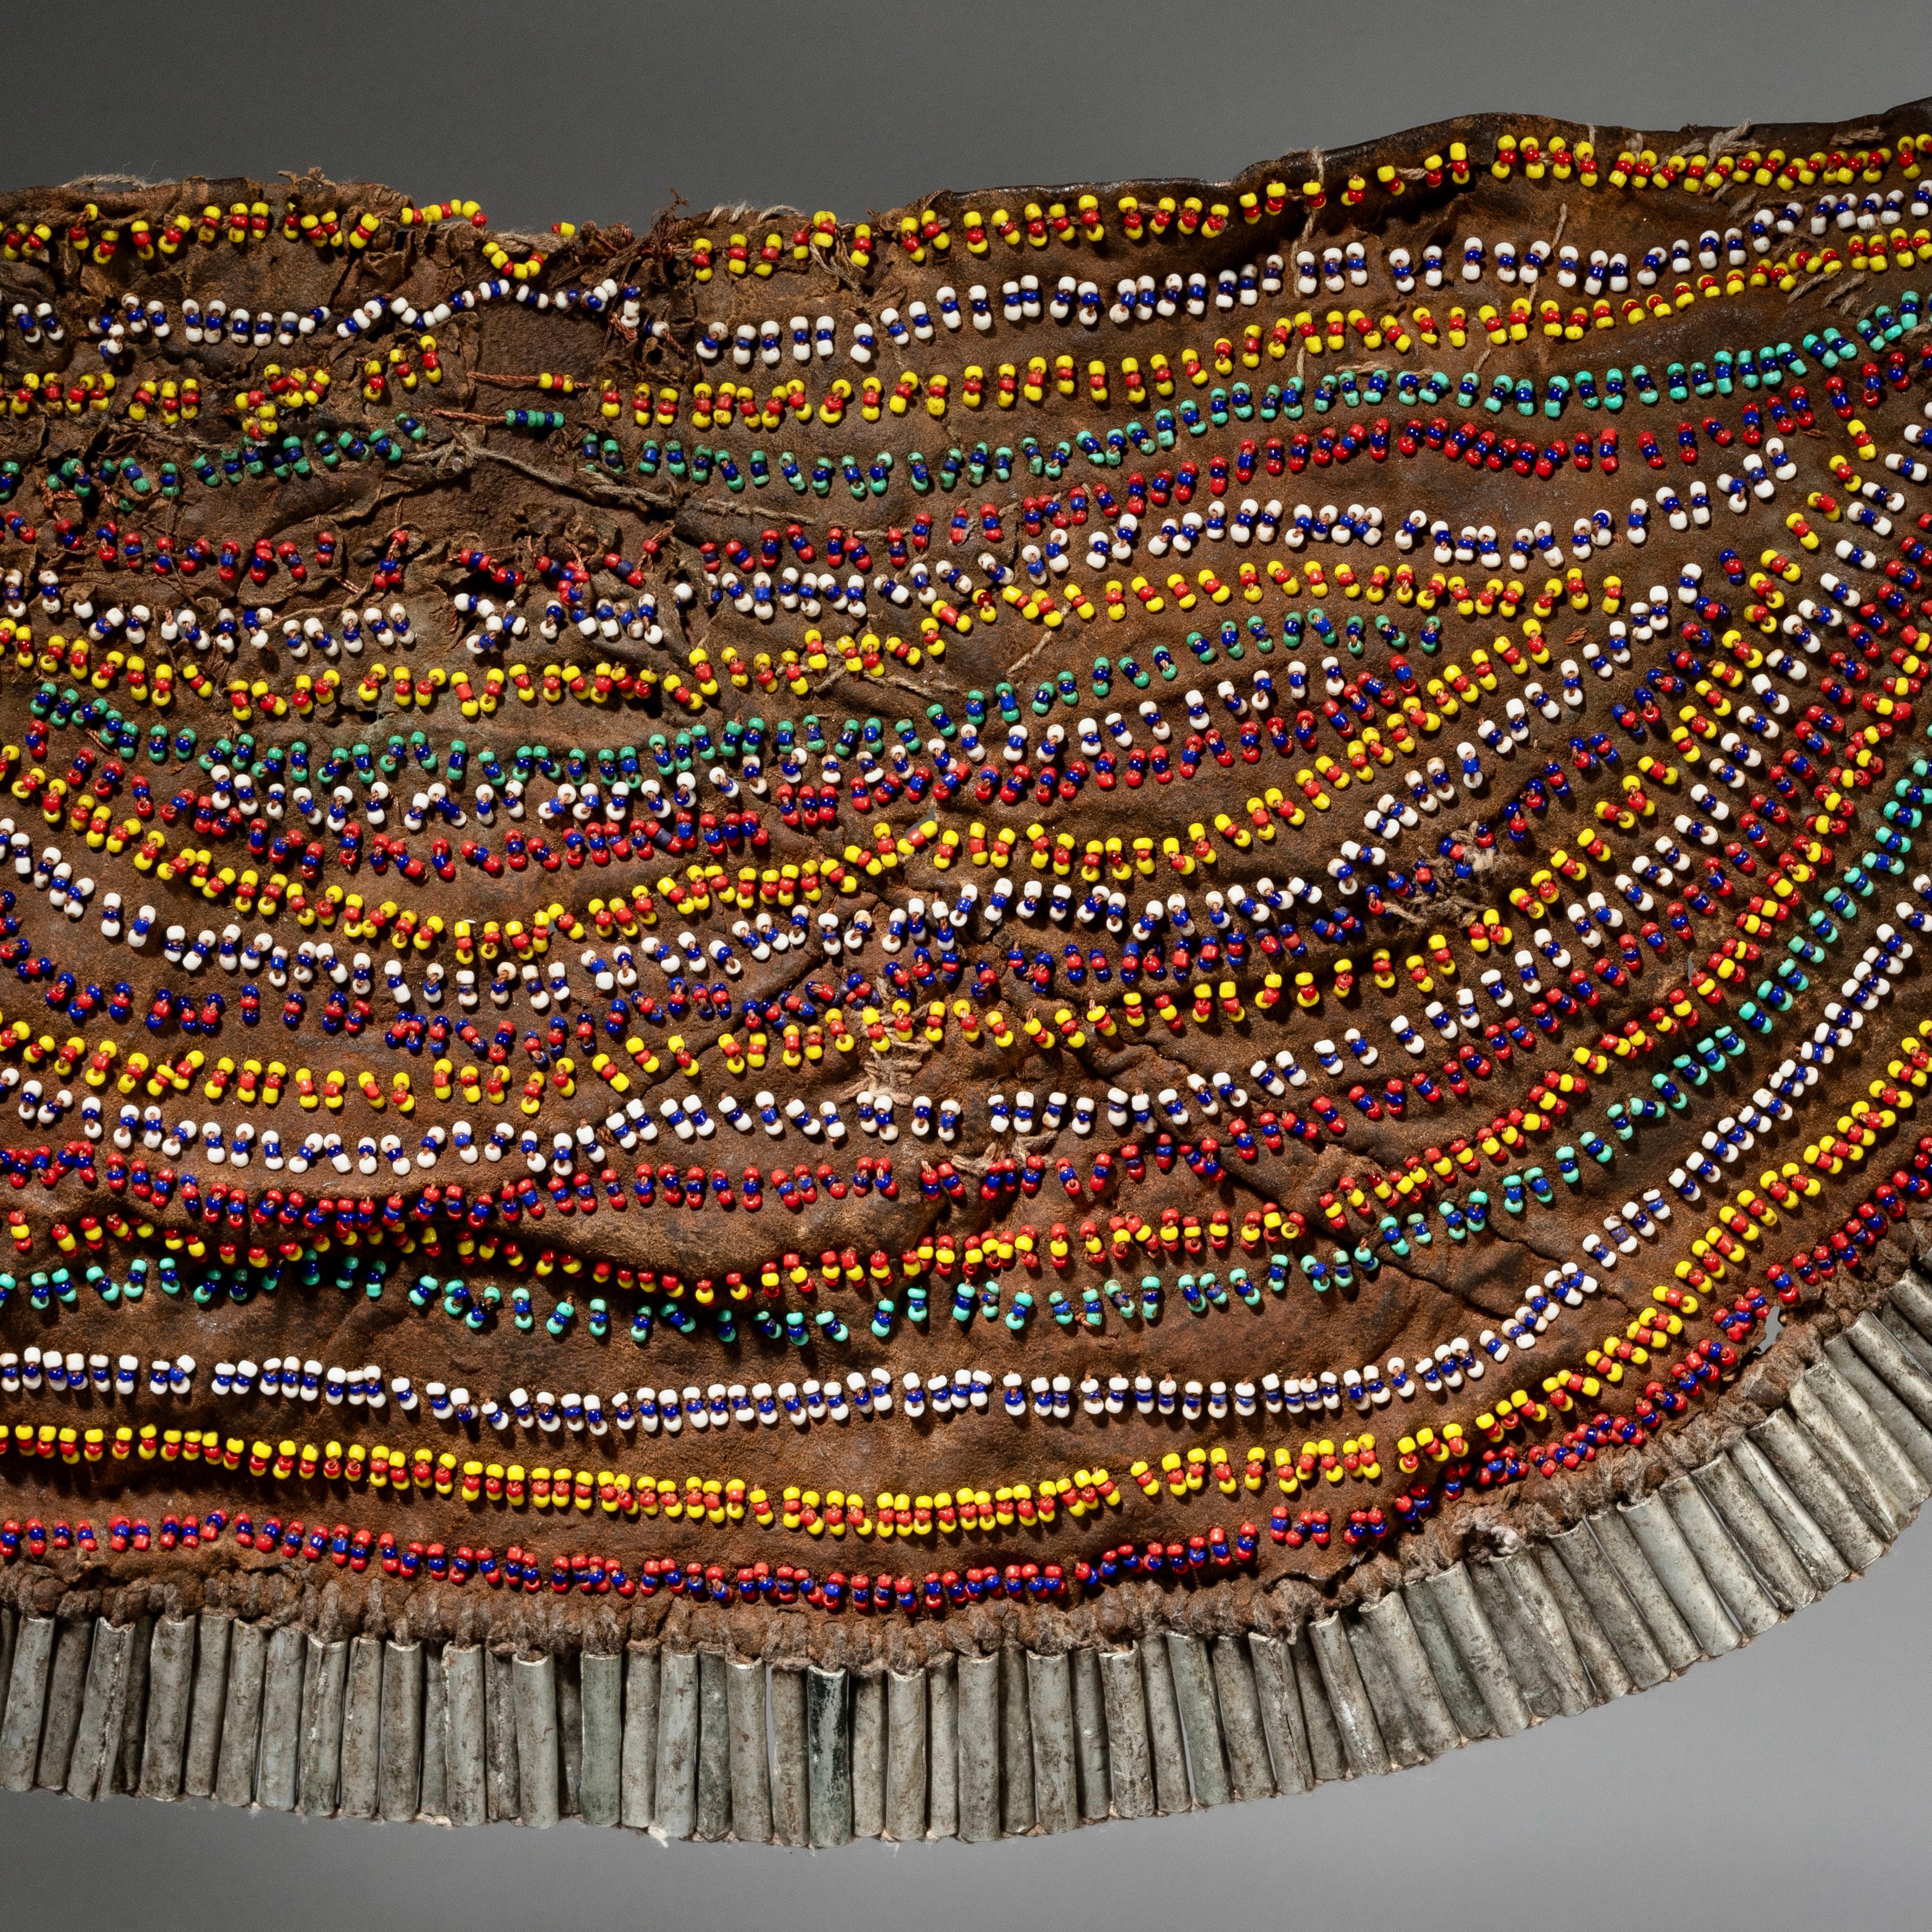 A SHAPELY + GRAPHIC BEAD LEATHER APRON, TOPOSA TRIBE EAST AFRICA ( No 1801)